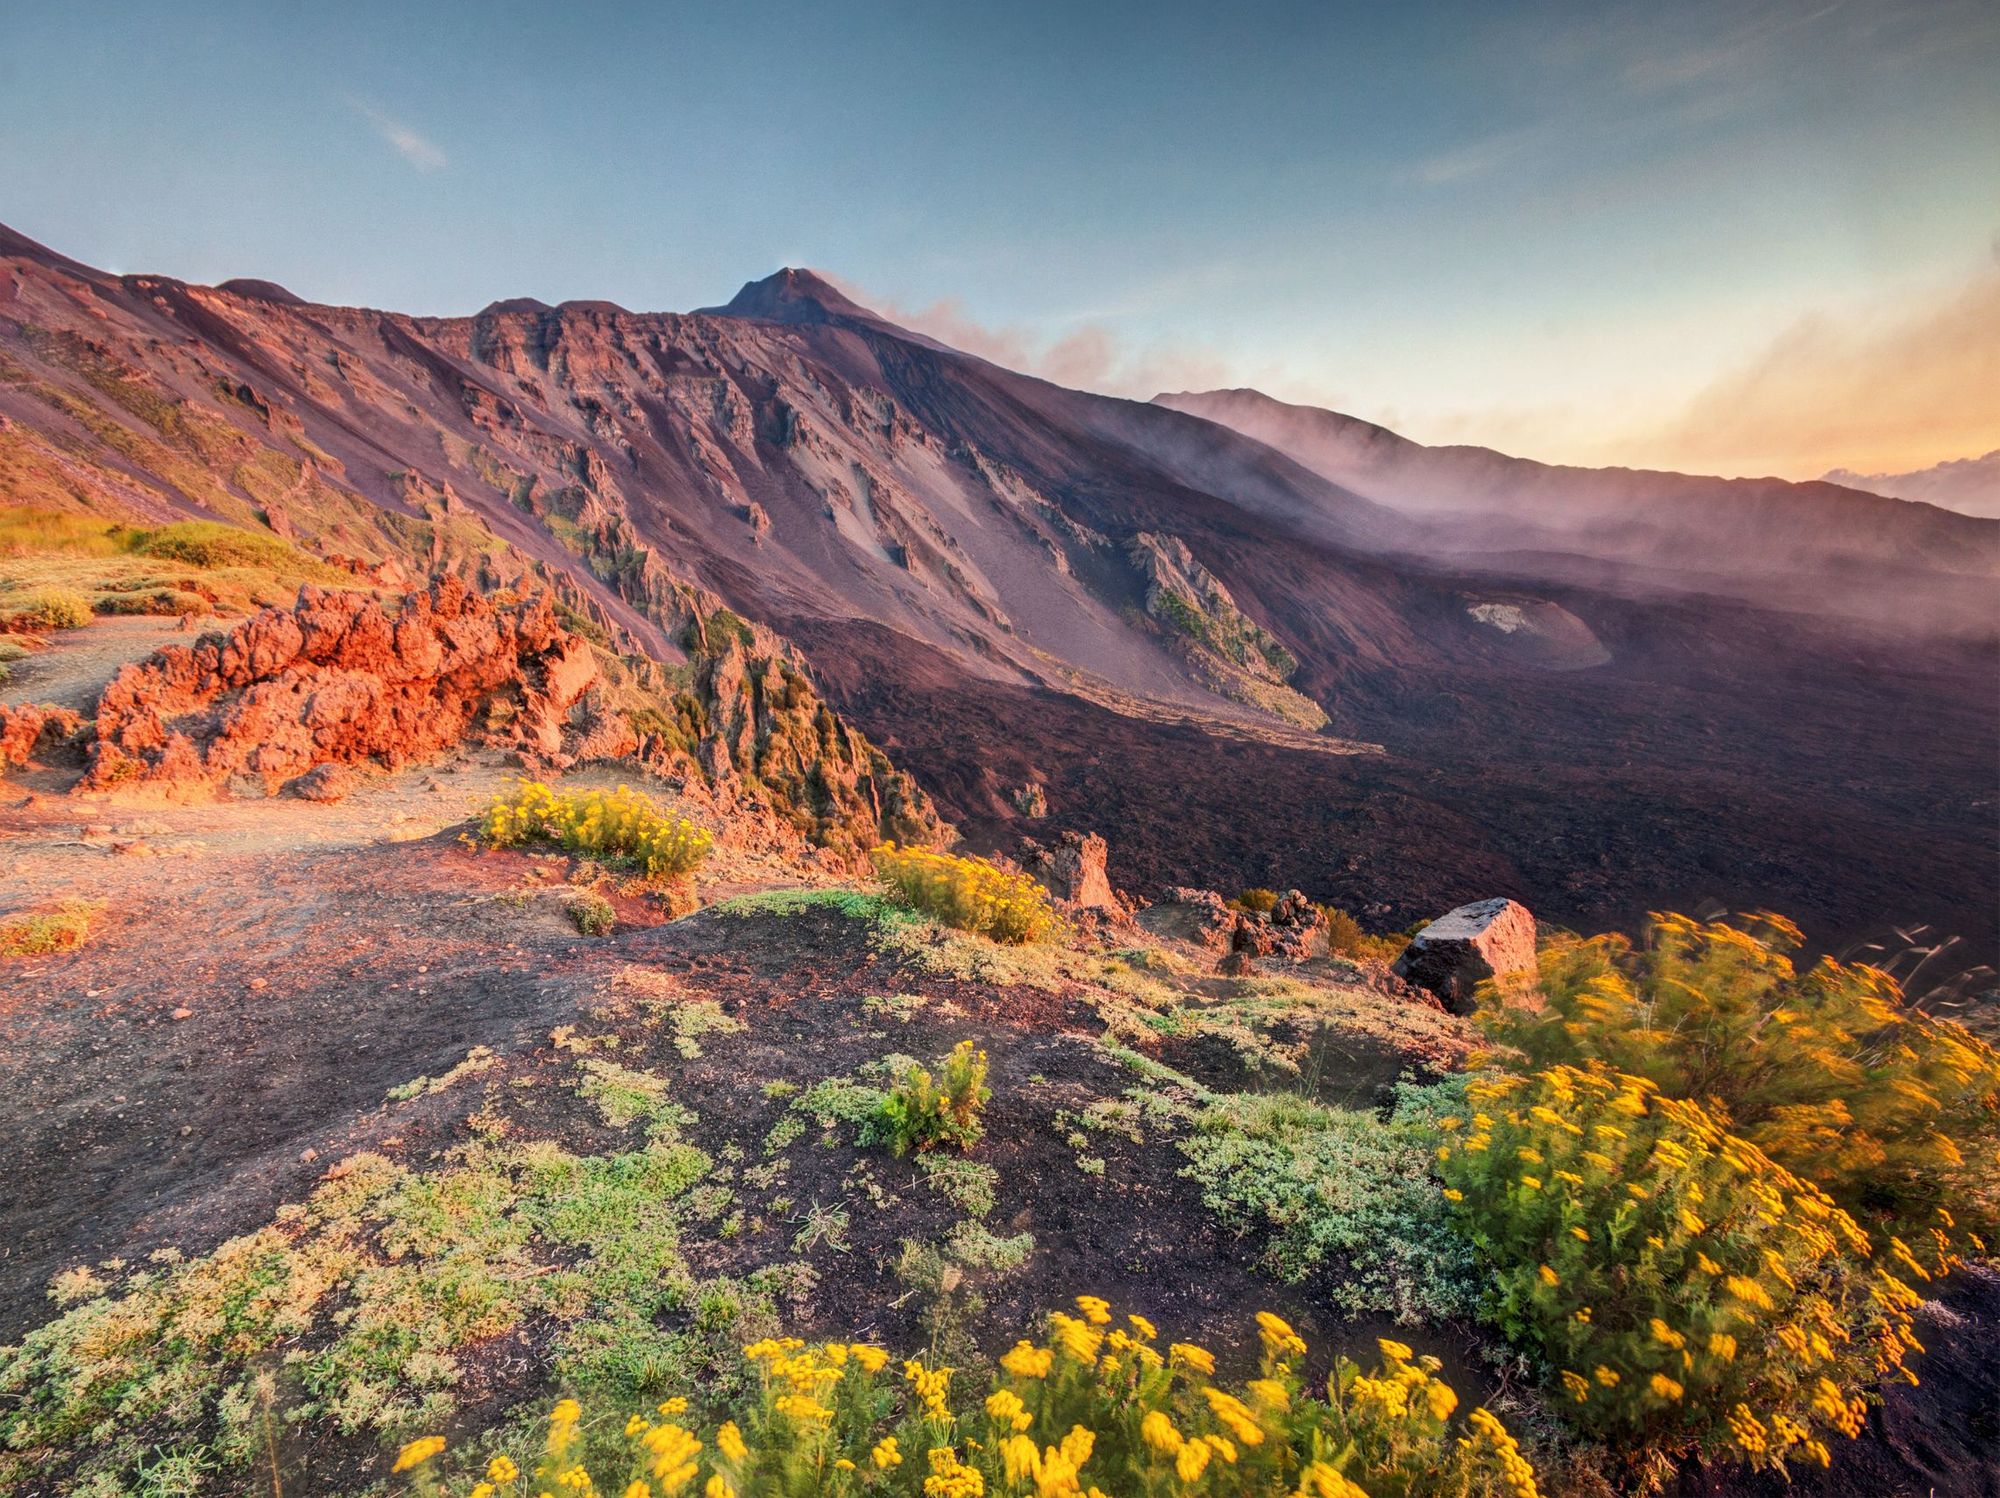 Etna Volcano in Sicily, with colourful flowers blooming in the foreground, on the rich soil. Photo: Getty